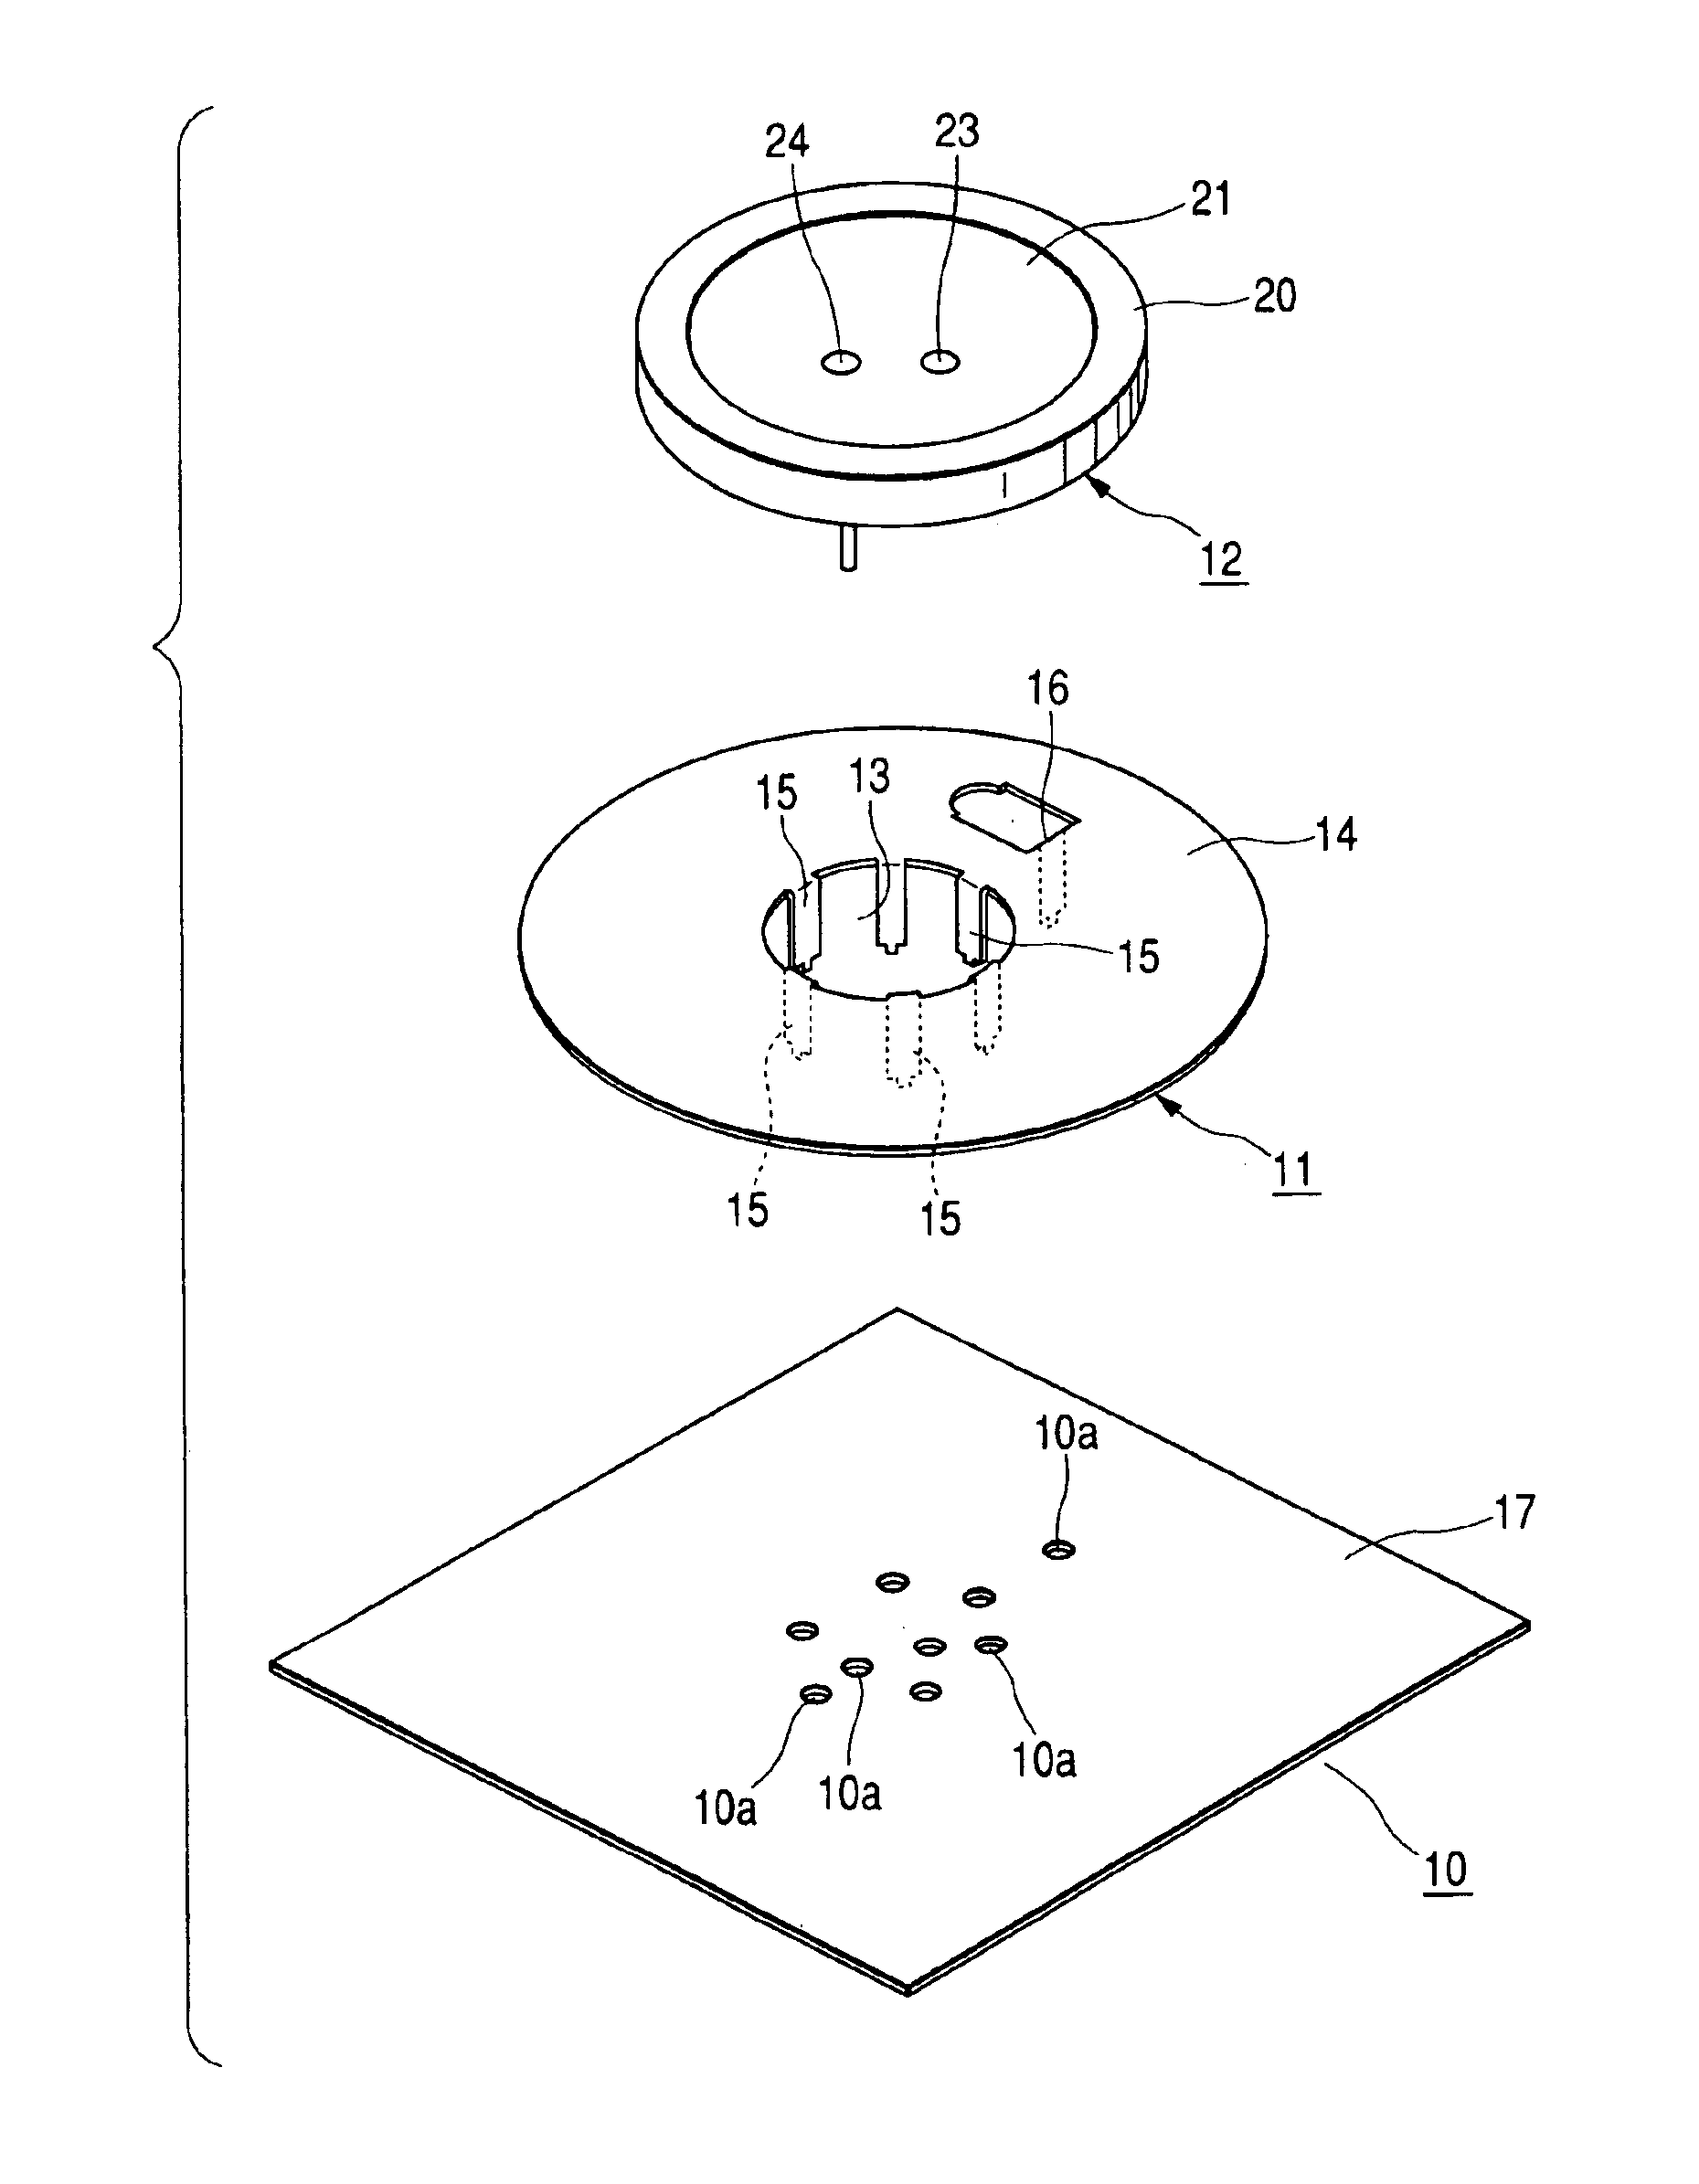 Combined antenna with antenna combining circularly polarized wave antenna and vertical antenna